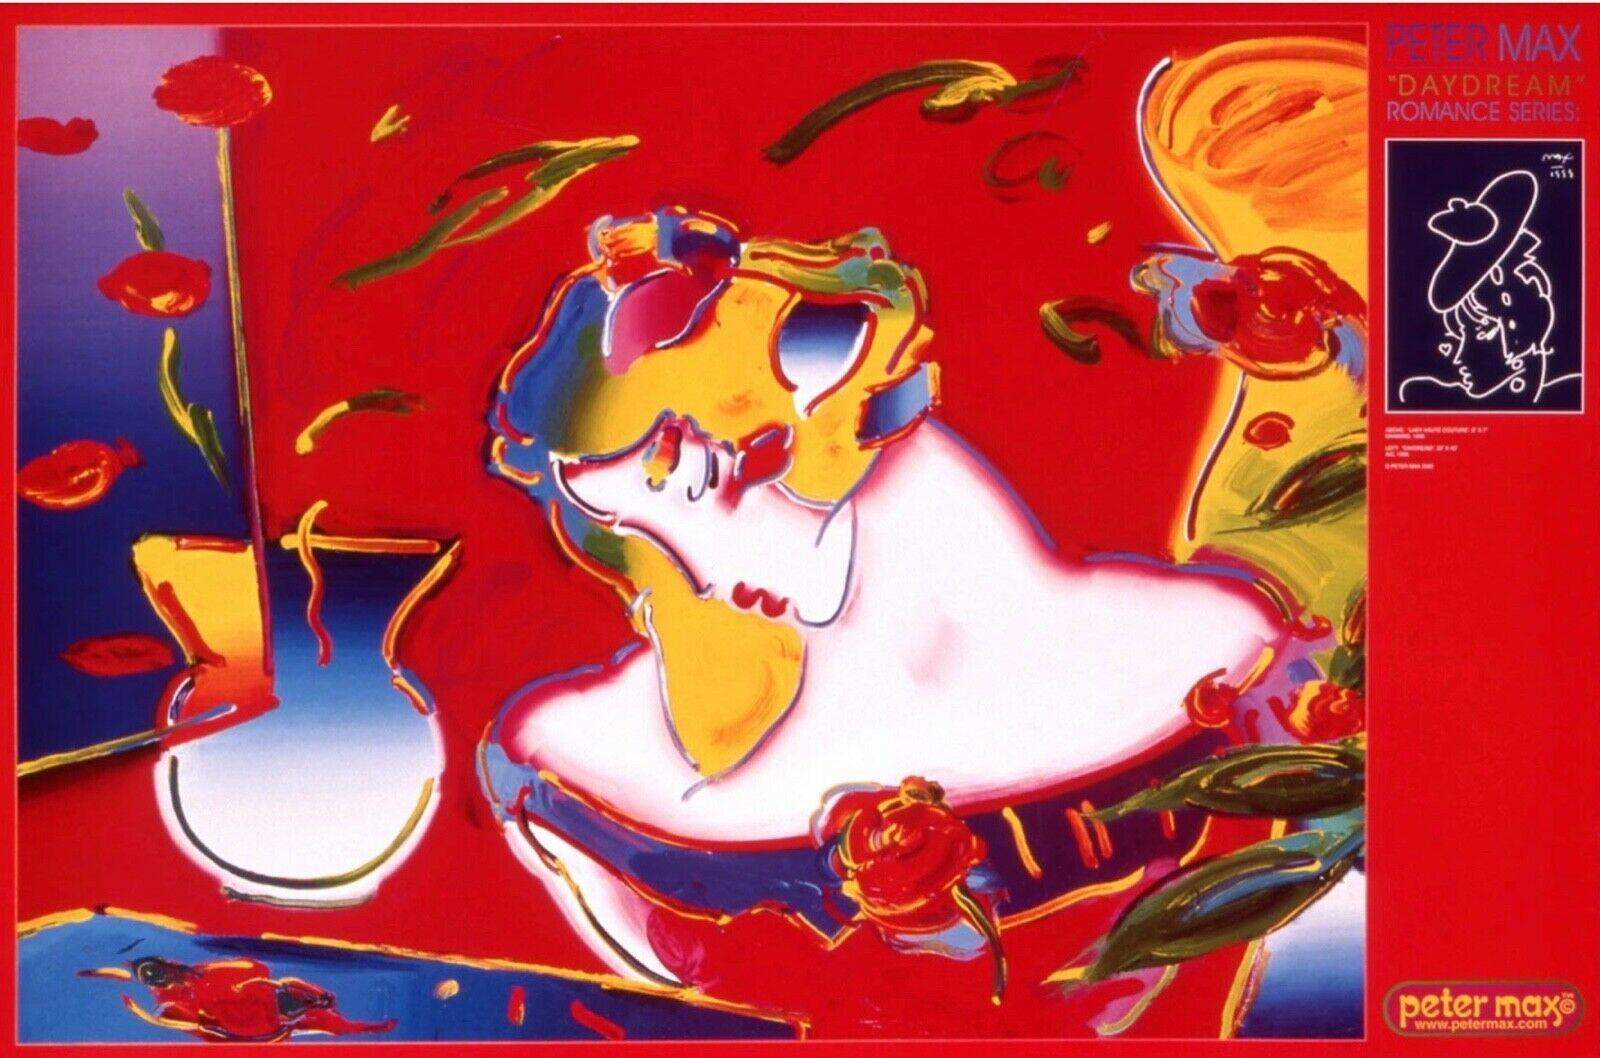 Peter Max Figurative Print - Day Dream: Romance Series - SIGNED